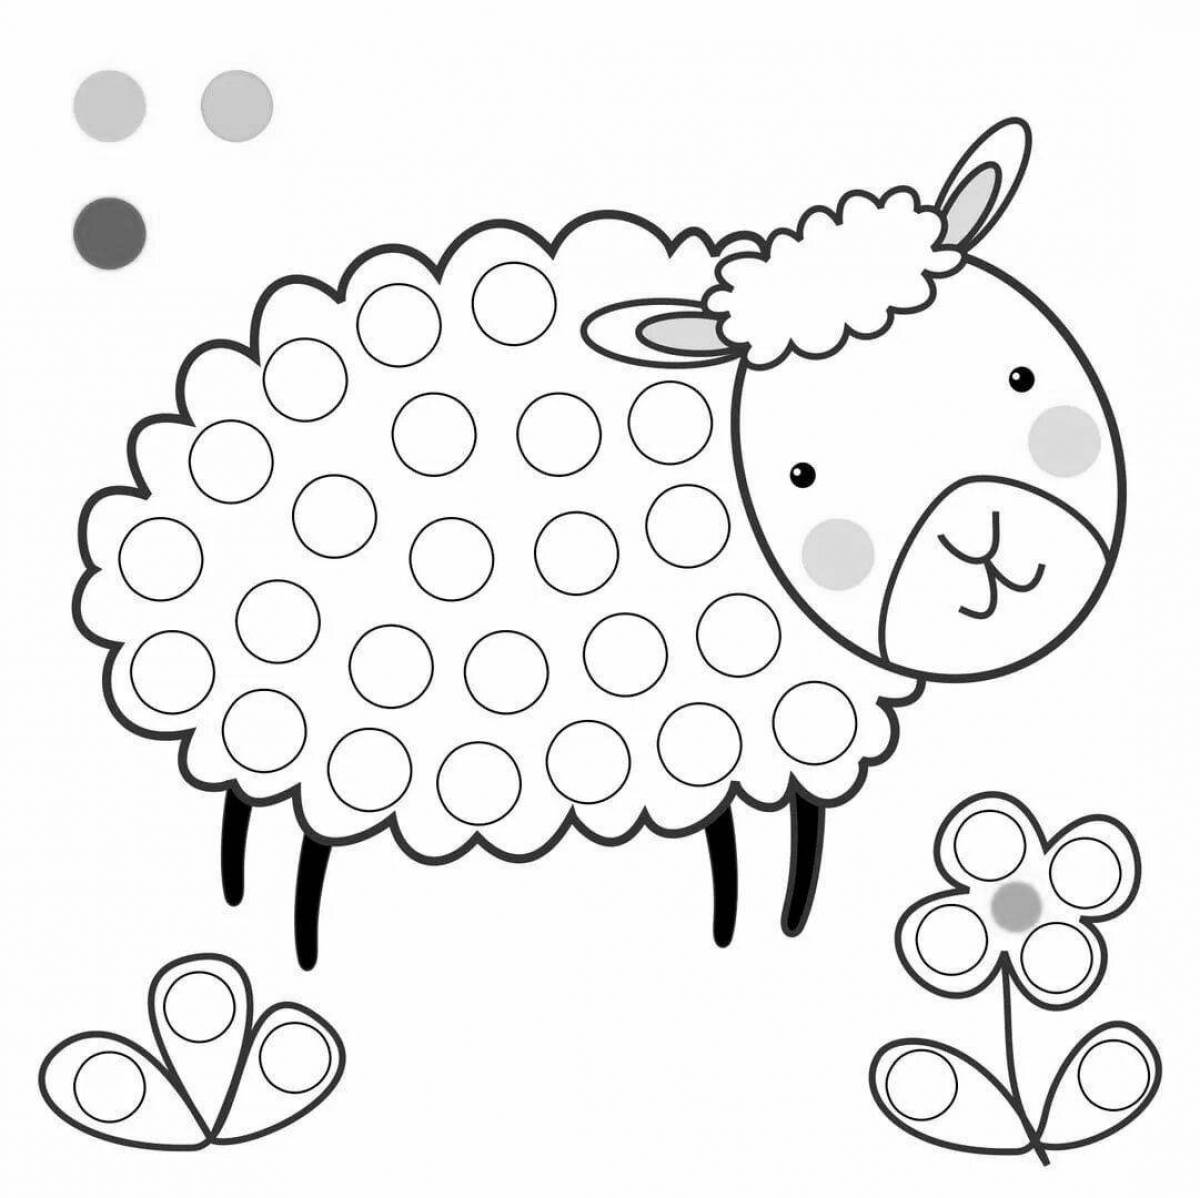 Playful finger coloring page for toddlers